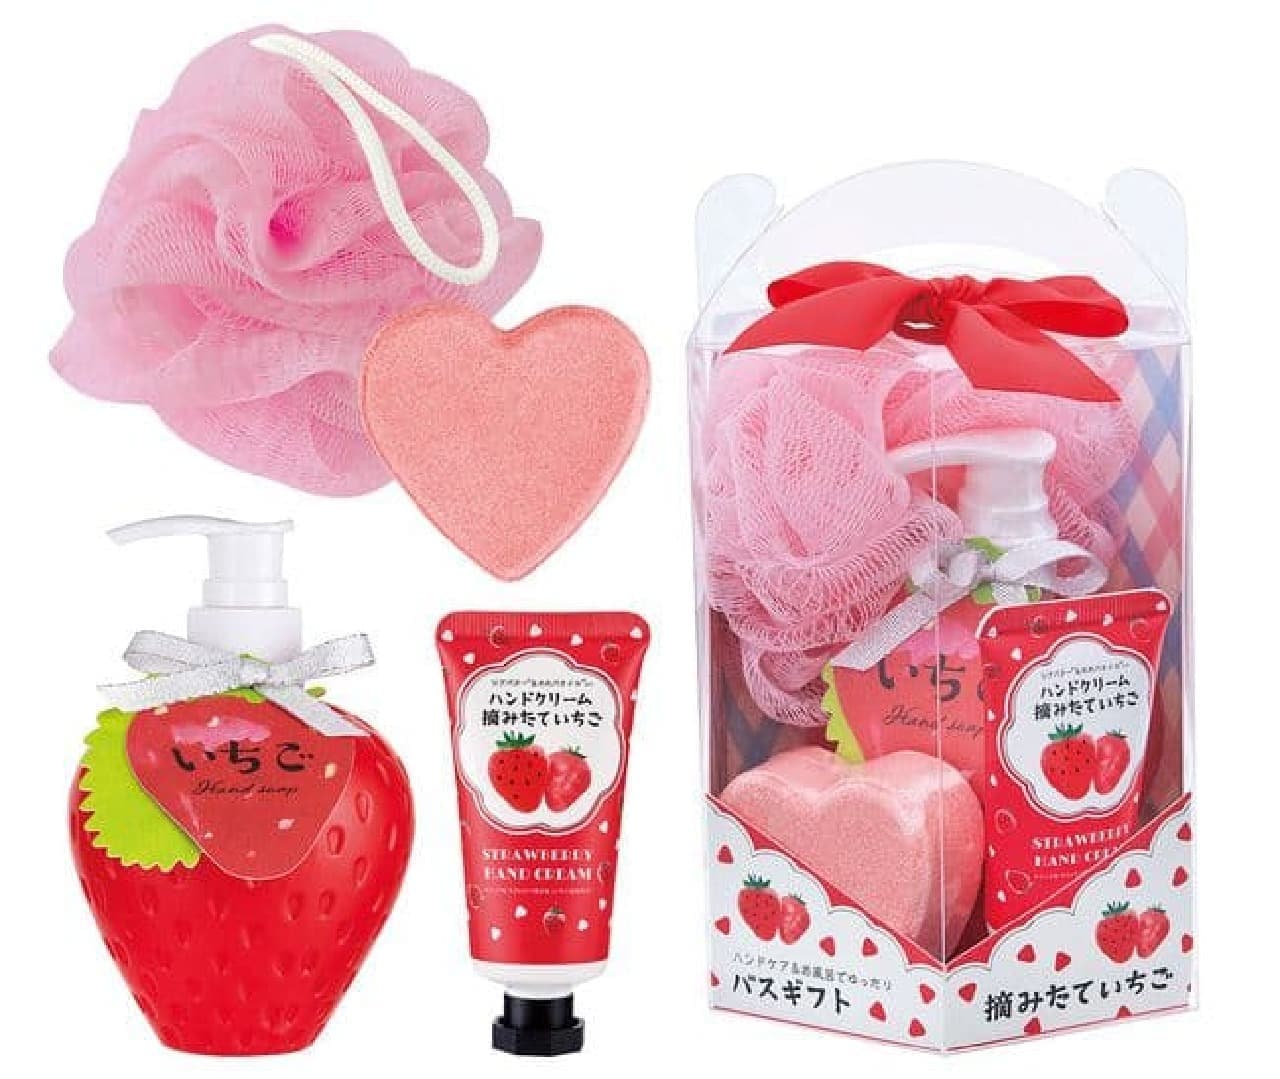 Strawberry CB Bath Gift The scent of picked strawberries